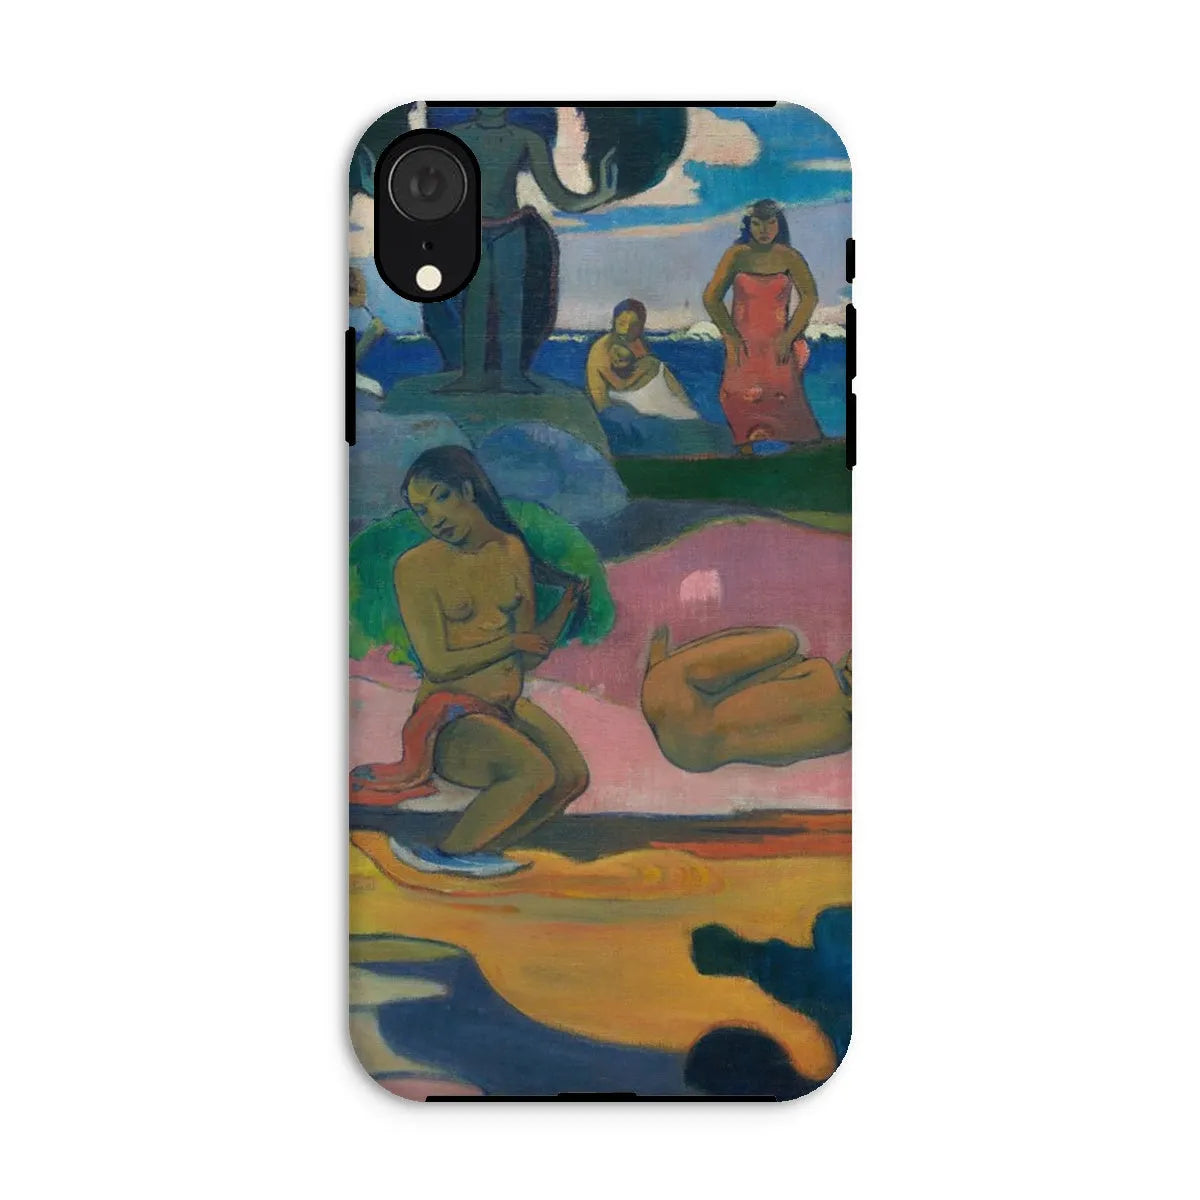 Day Of The God French Tahitian Art Phone Case - Paul Gauguin - Iphone Xr / Matte - Mobile Phone Cases - Aesthetic Art